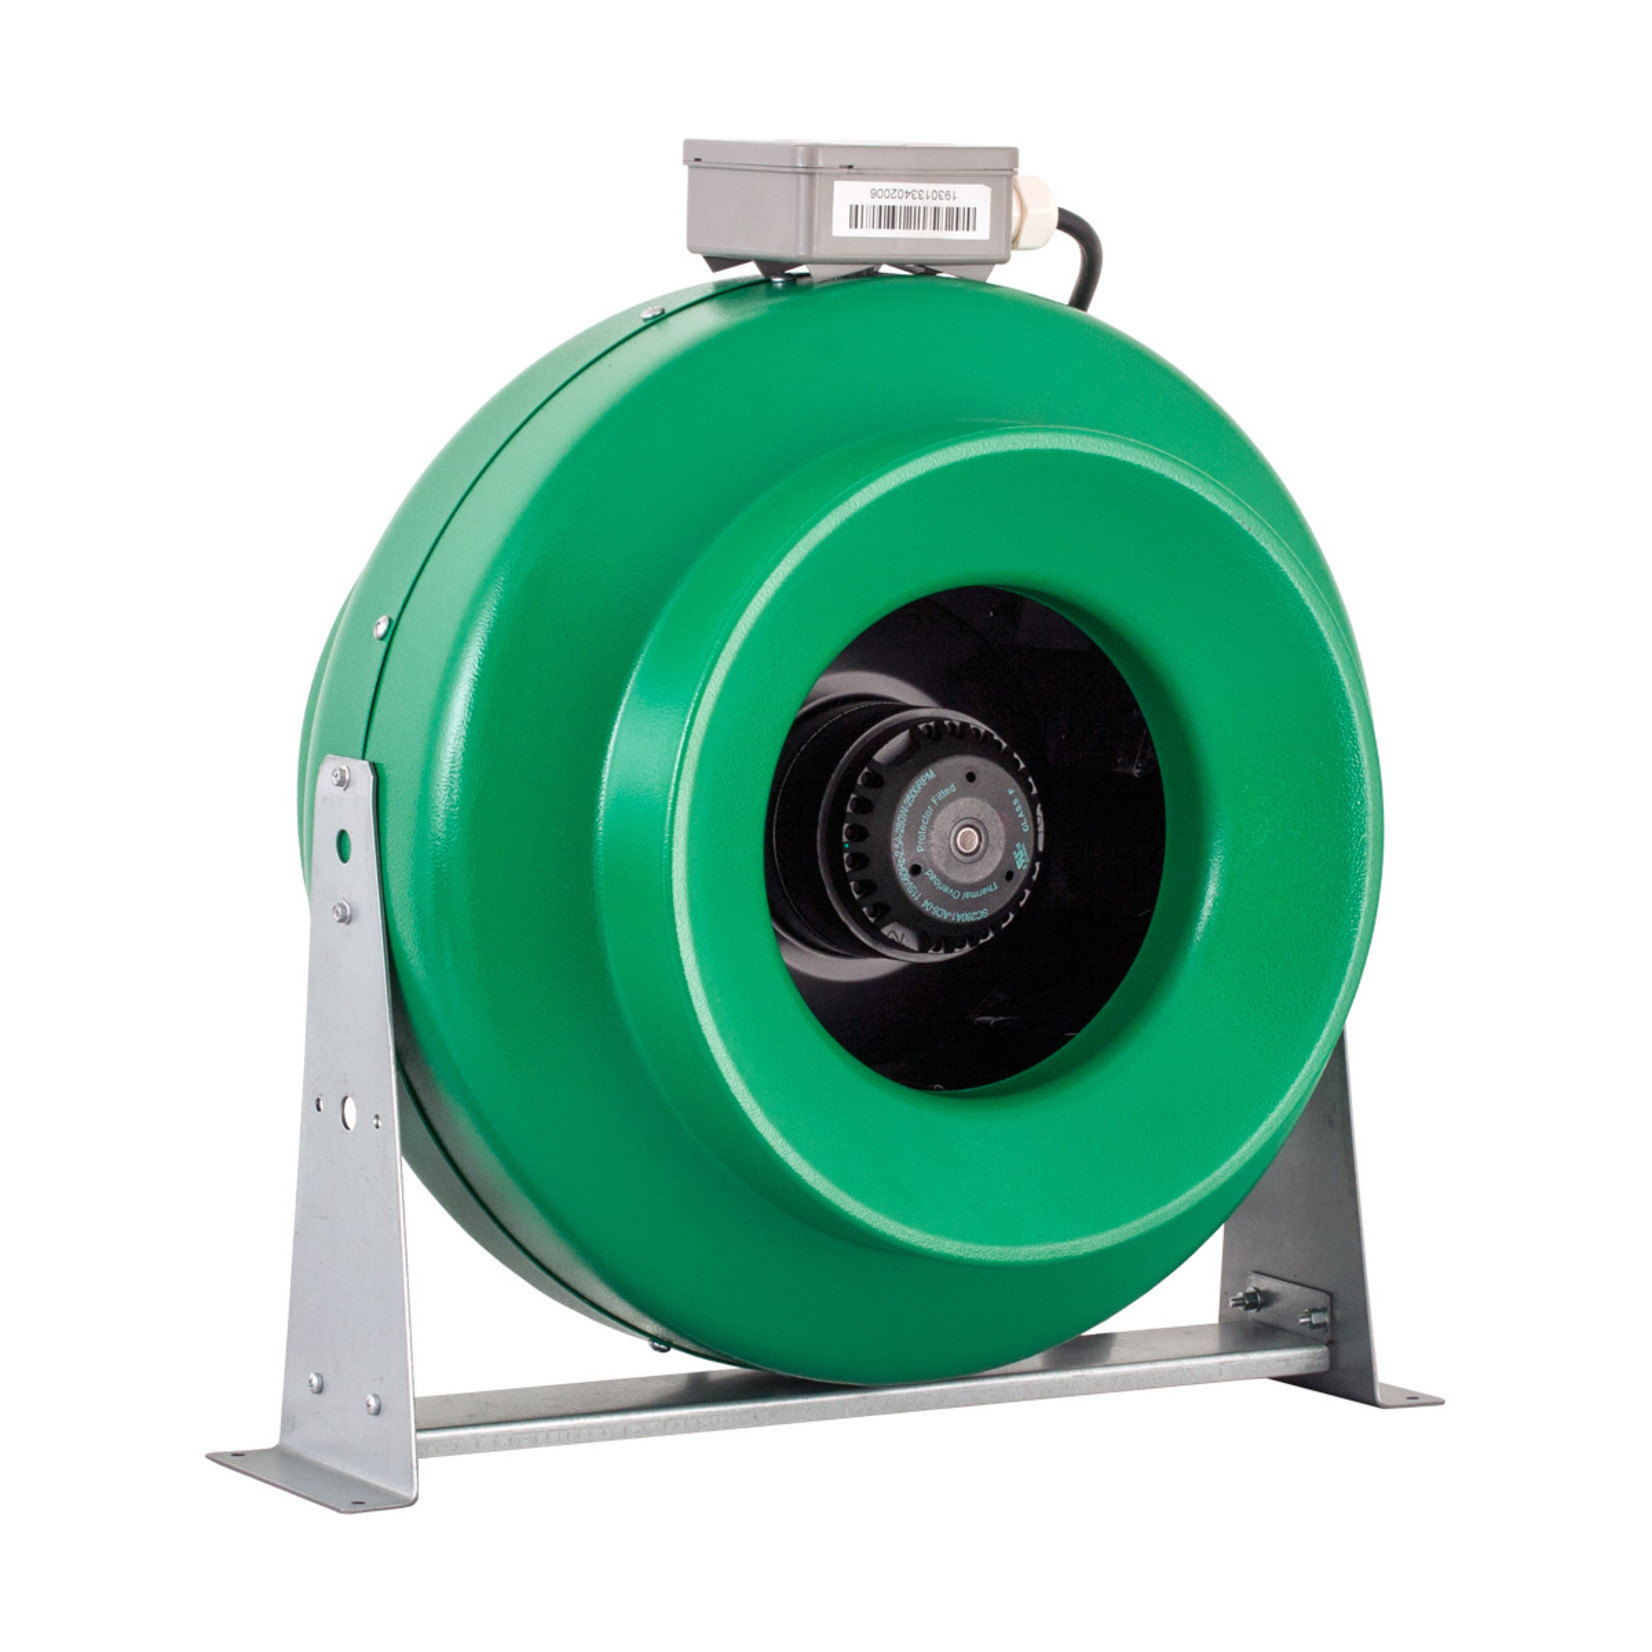 Active Air Active Air 12" Inline-Fan